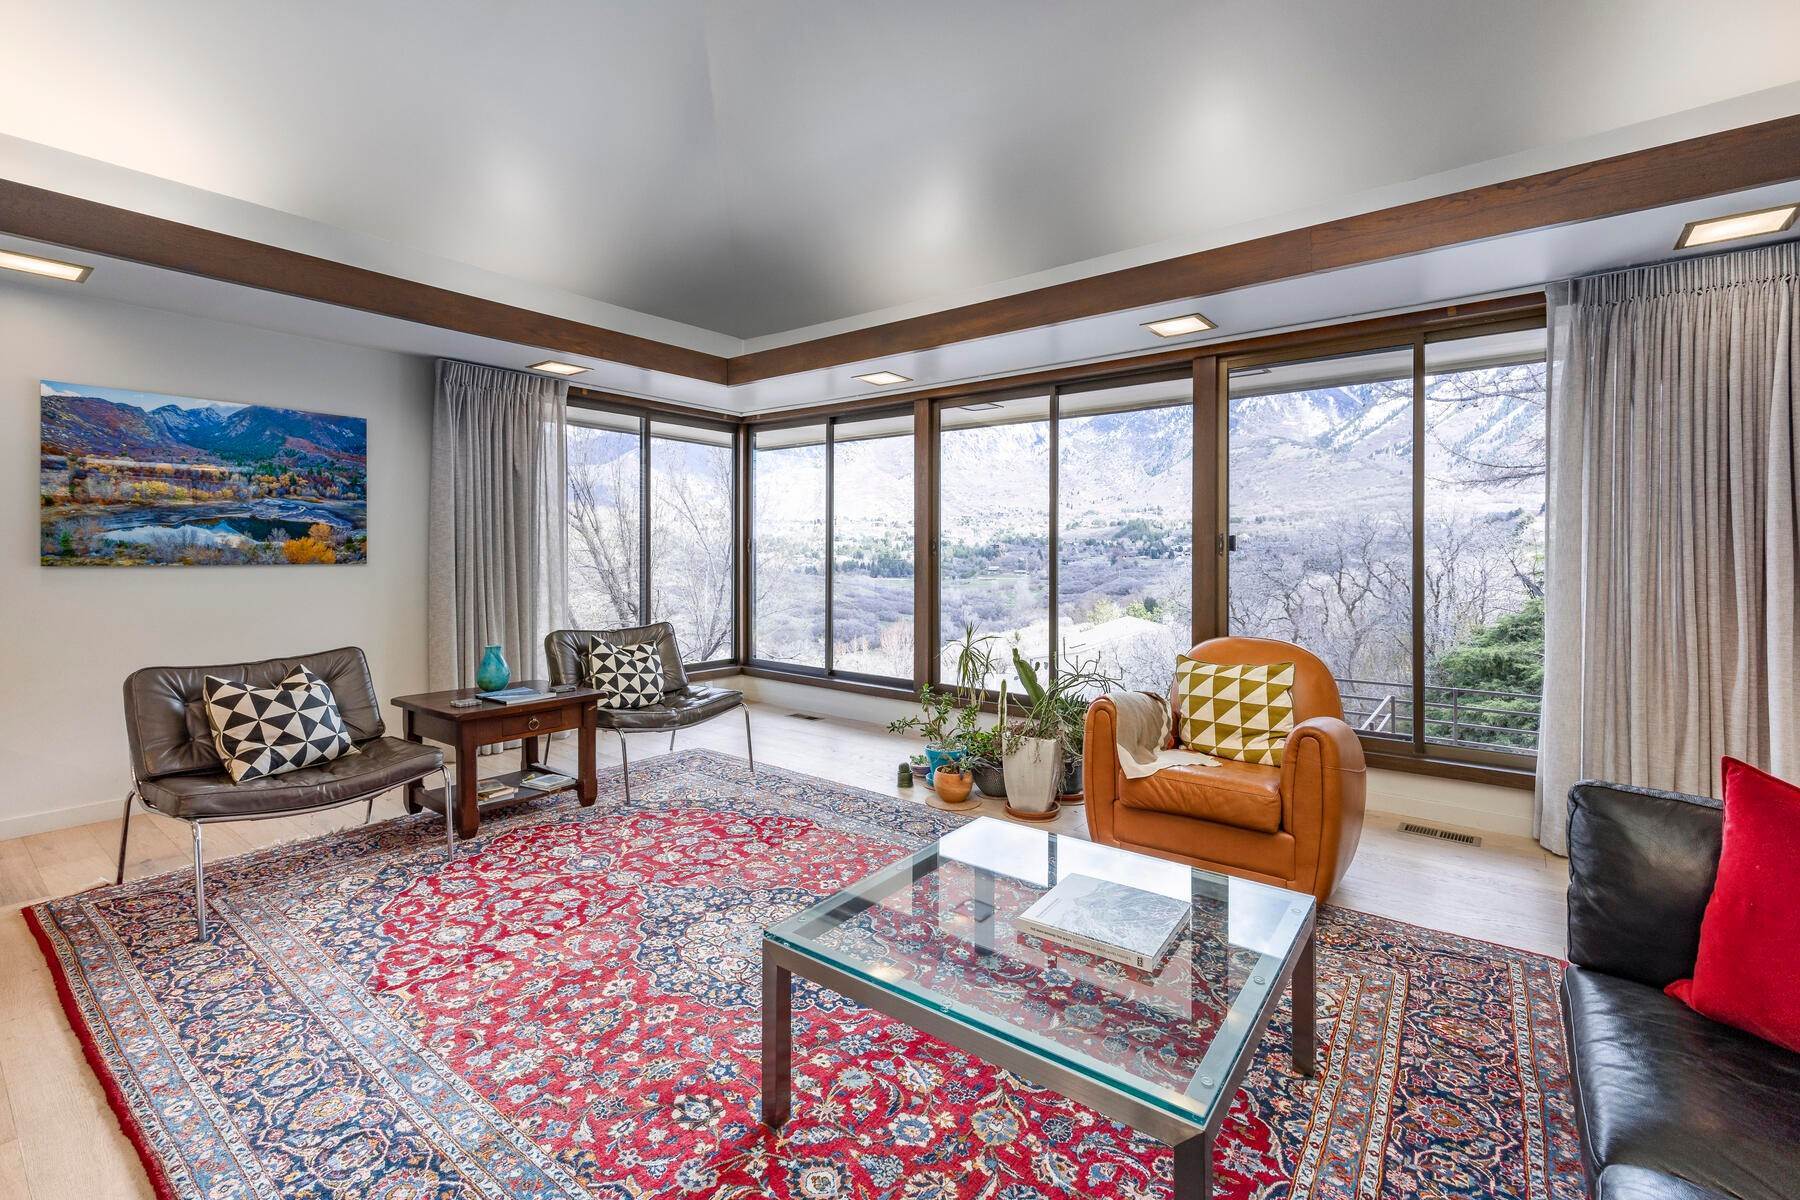 2. Single Family Homes for Sale at Mid Century Modern Home with Views of Little Cottonwood Canyon 2496 E Charros Rd Sandy, Utah 84092 United States